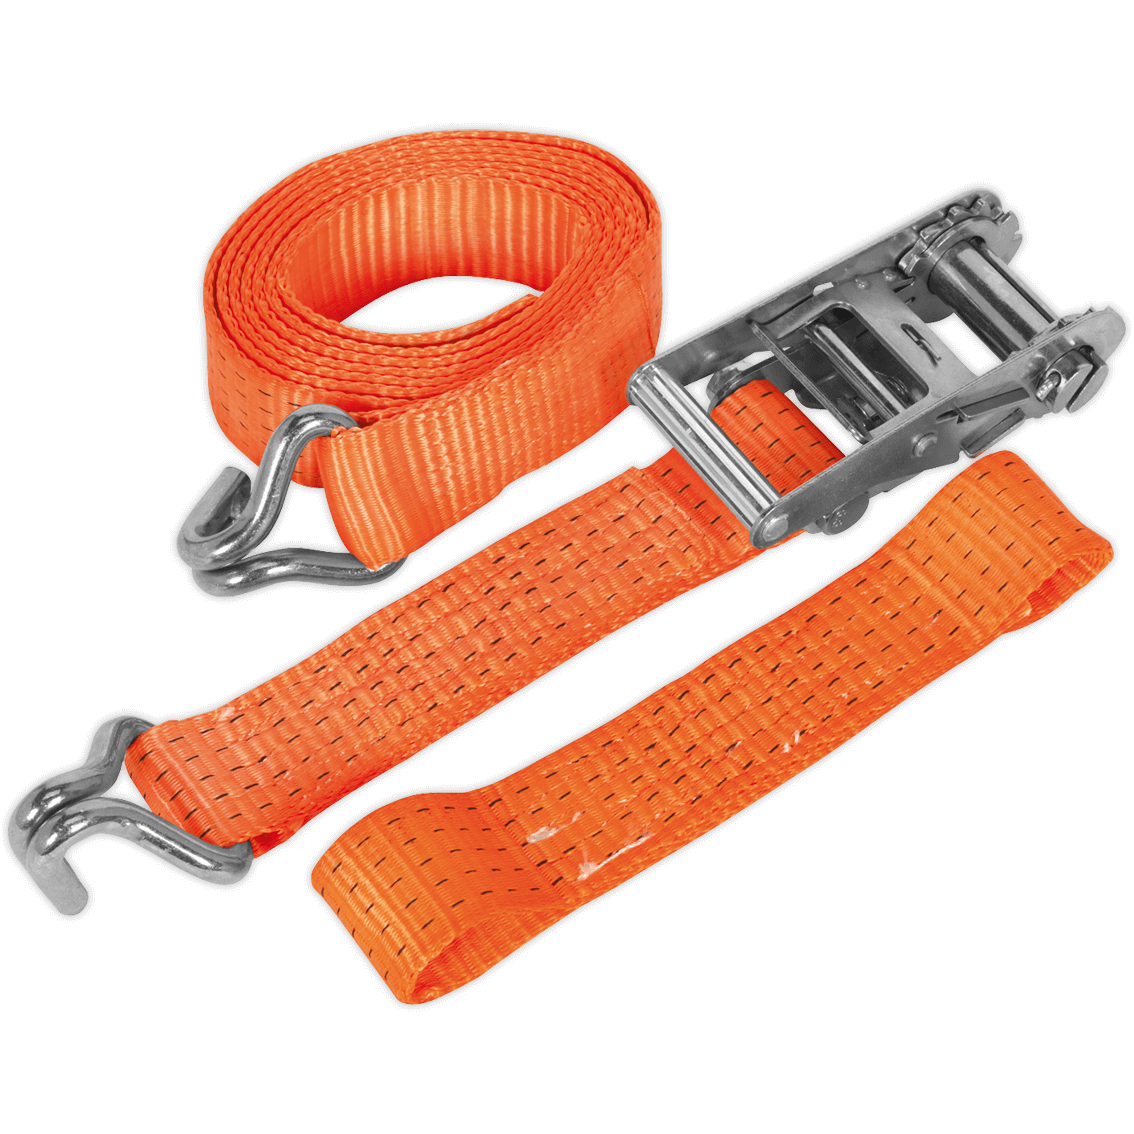 Sealey Ratchet Tie Down Strap For Car Transporters Trailer Accessories